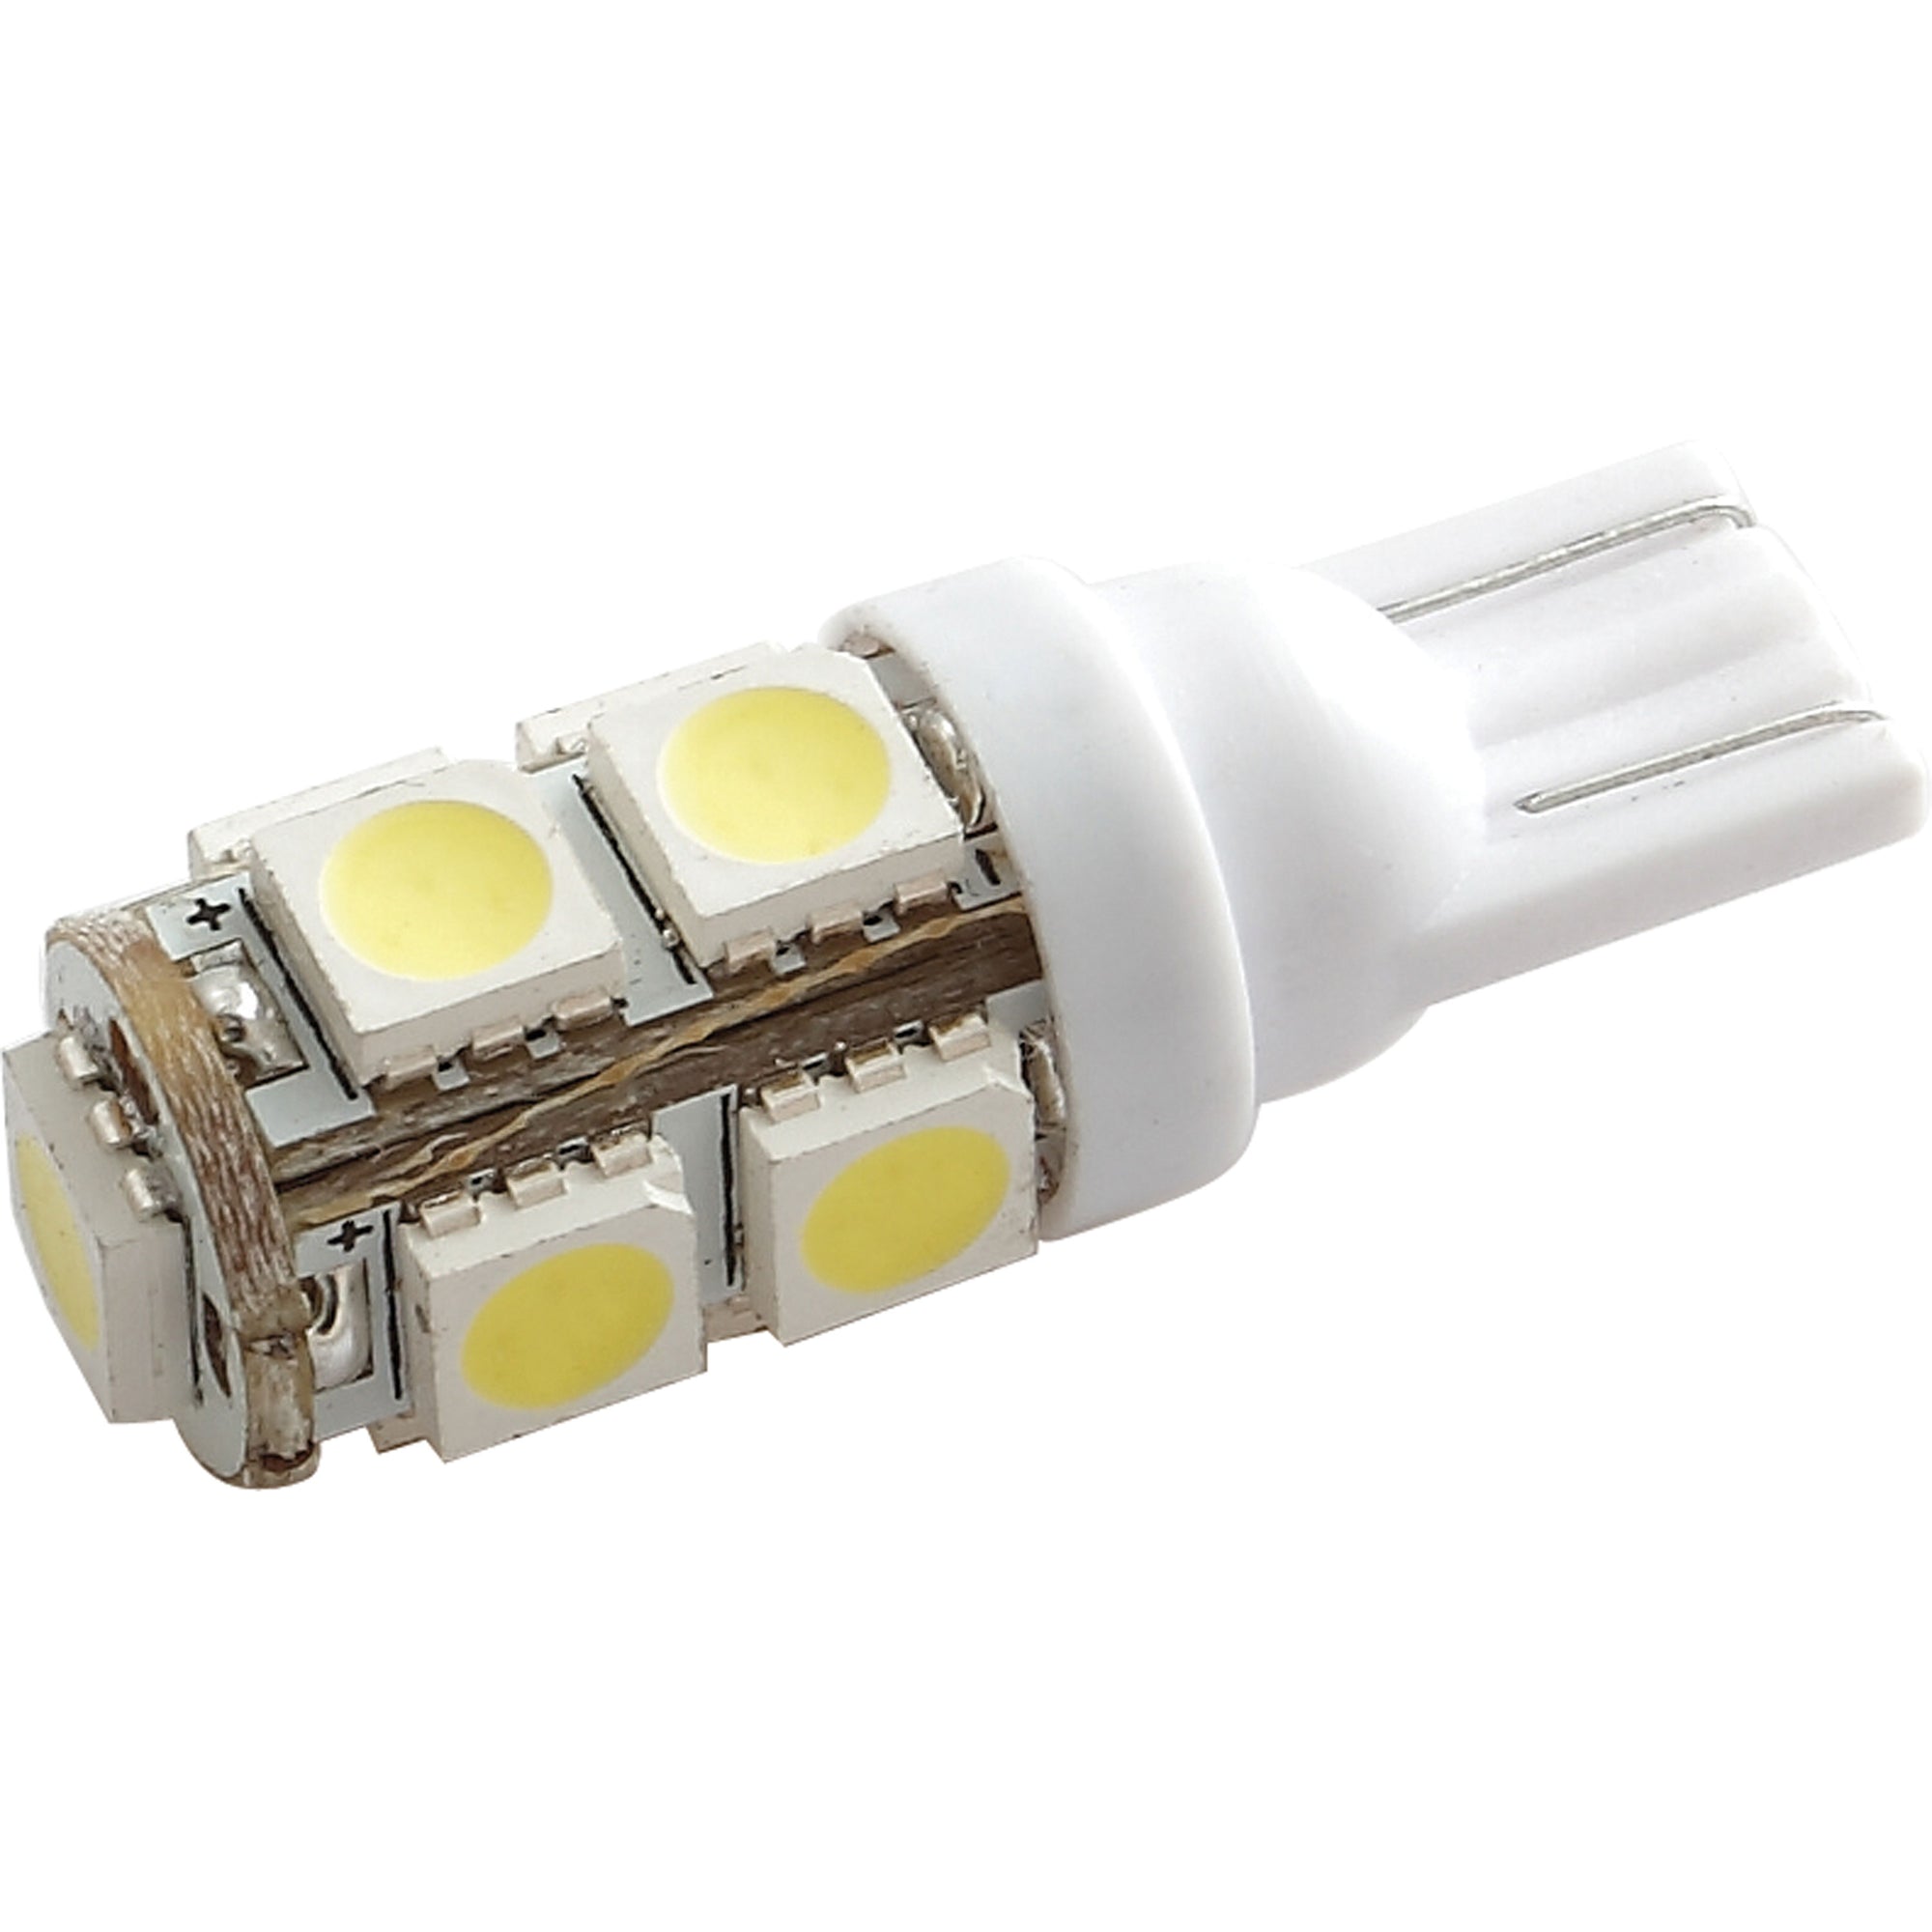 Ming's Mark 5050114 Green LongLife 12V LED Tower Bulb with 194 / T10 Base - 110 Lumens, Cool White